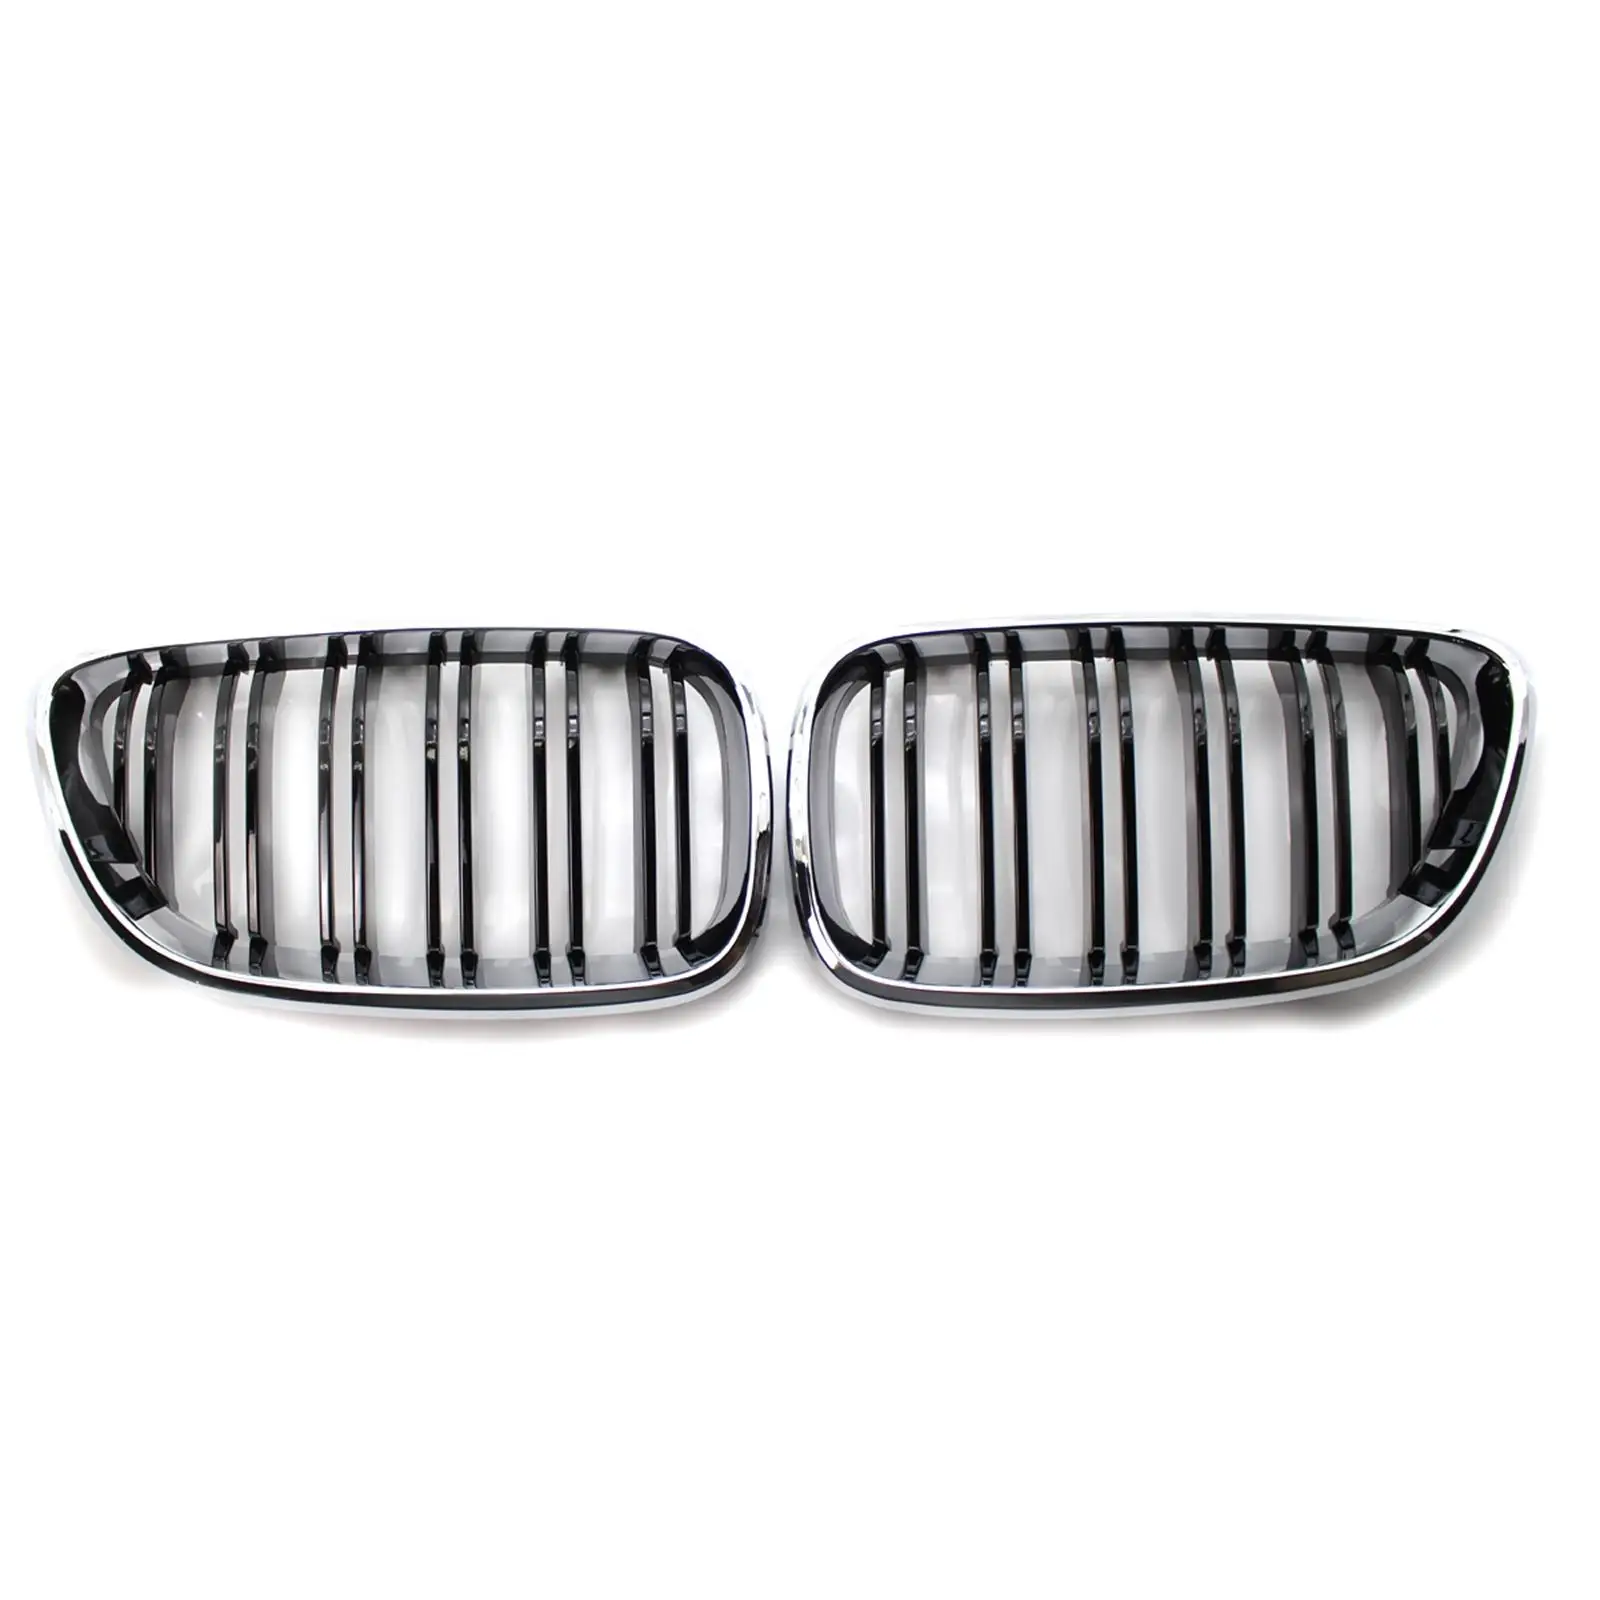 1Pair 51137295524 Dual Slat Front Grilles 51137295523 Frame for  F87 M2 Accessory Automotive High Performance